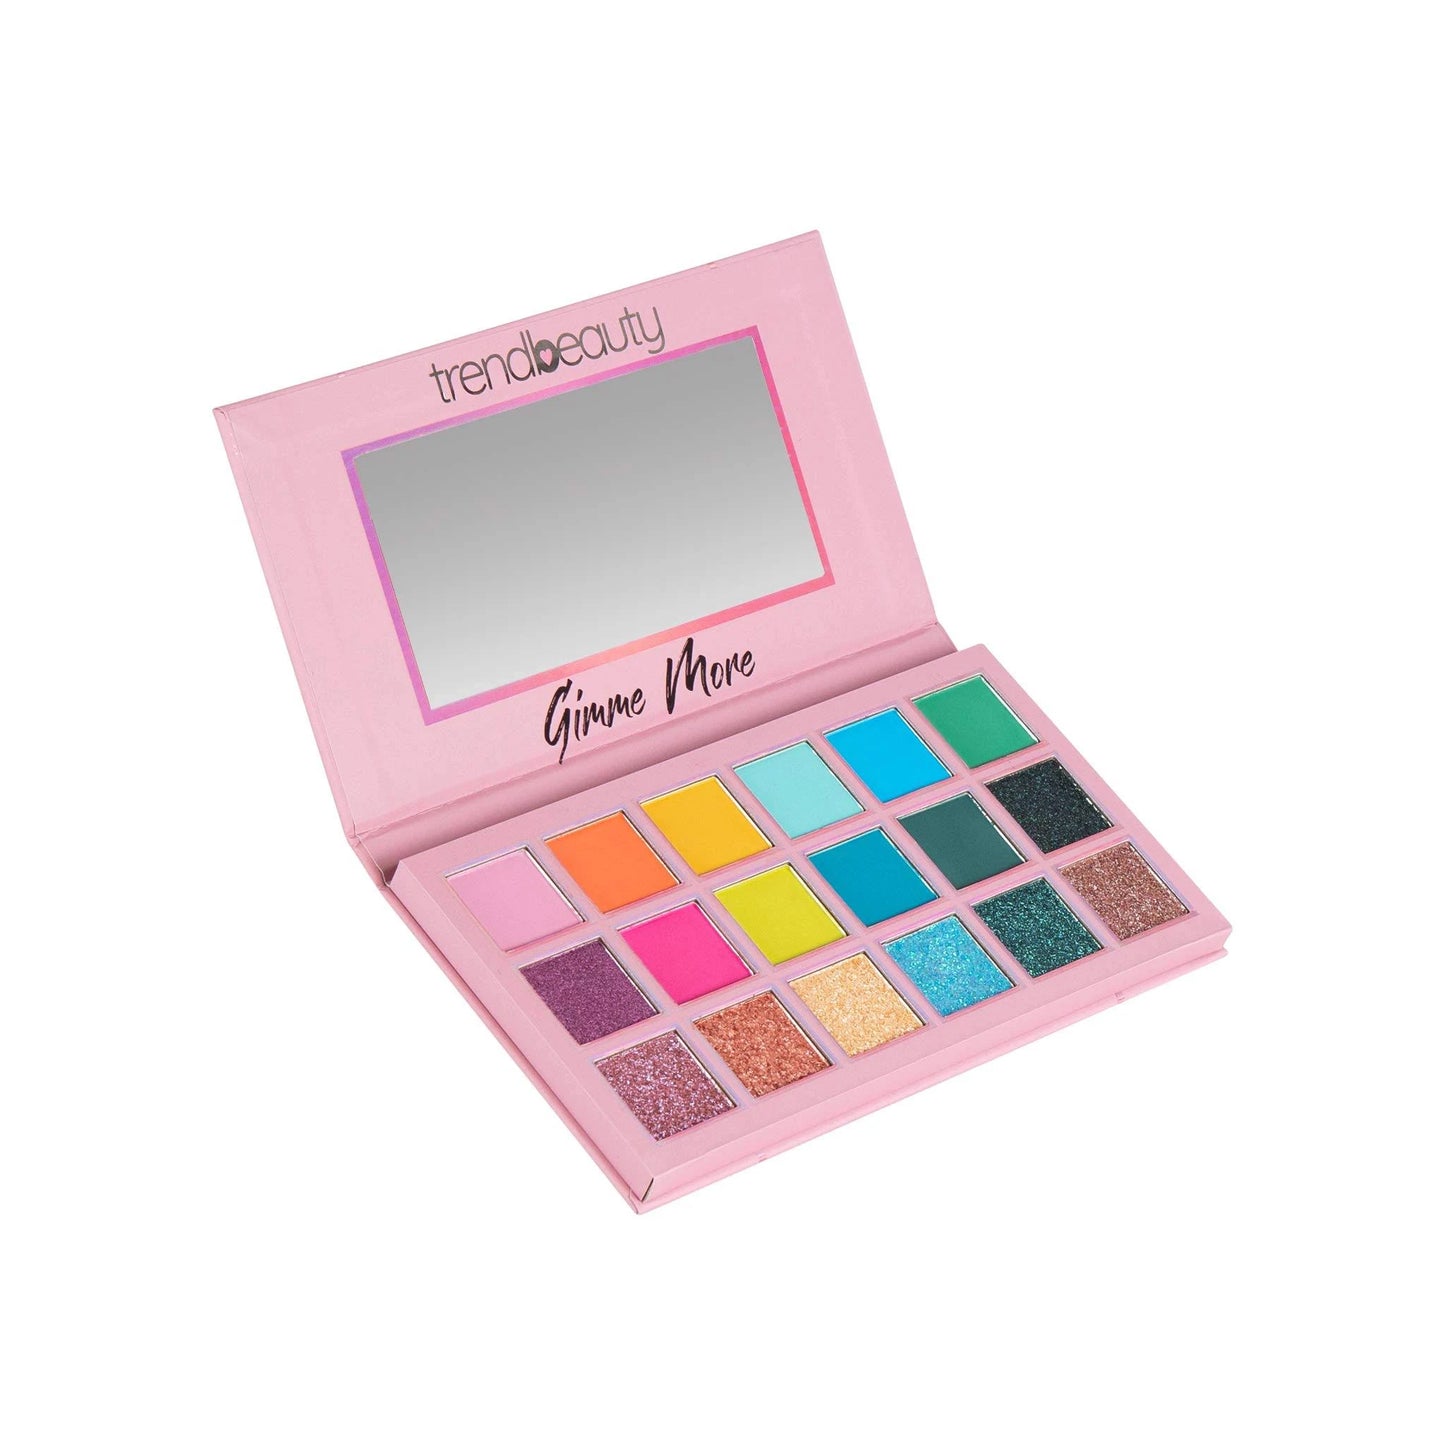 TREND BEAUTY - GIMME MORE EYESHADOW PALETTE